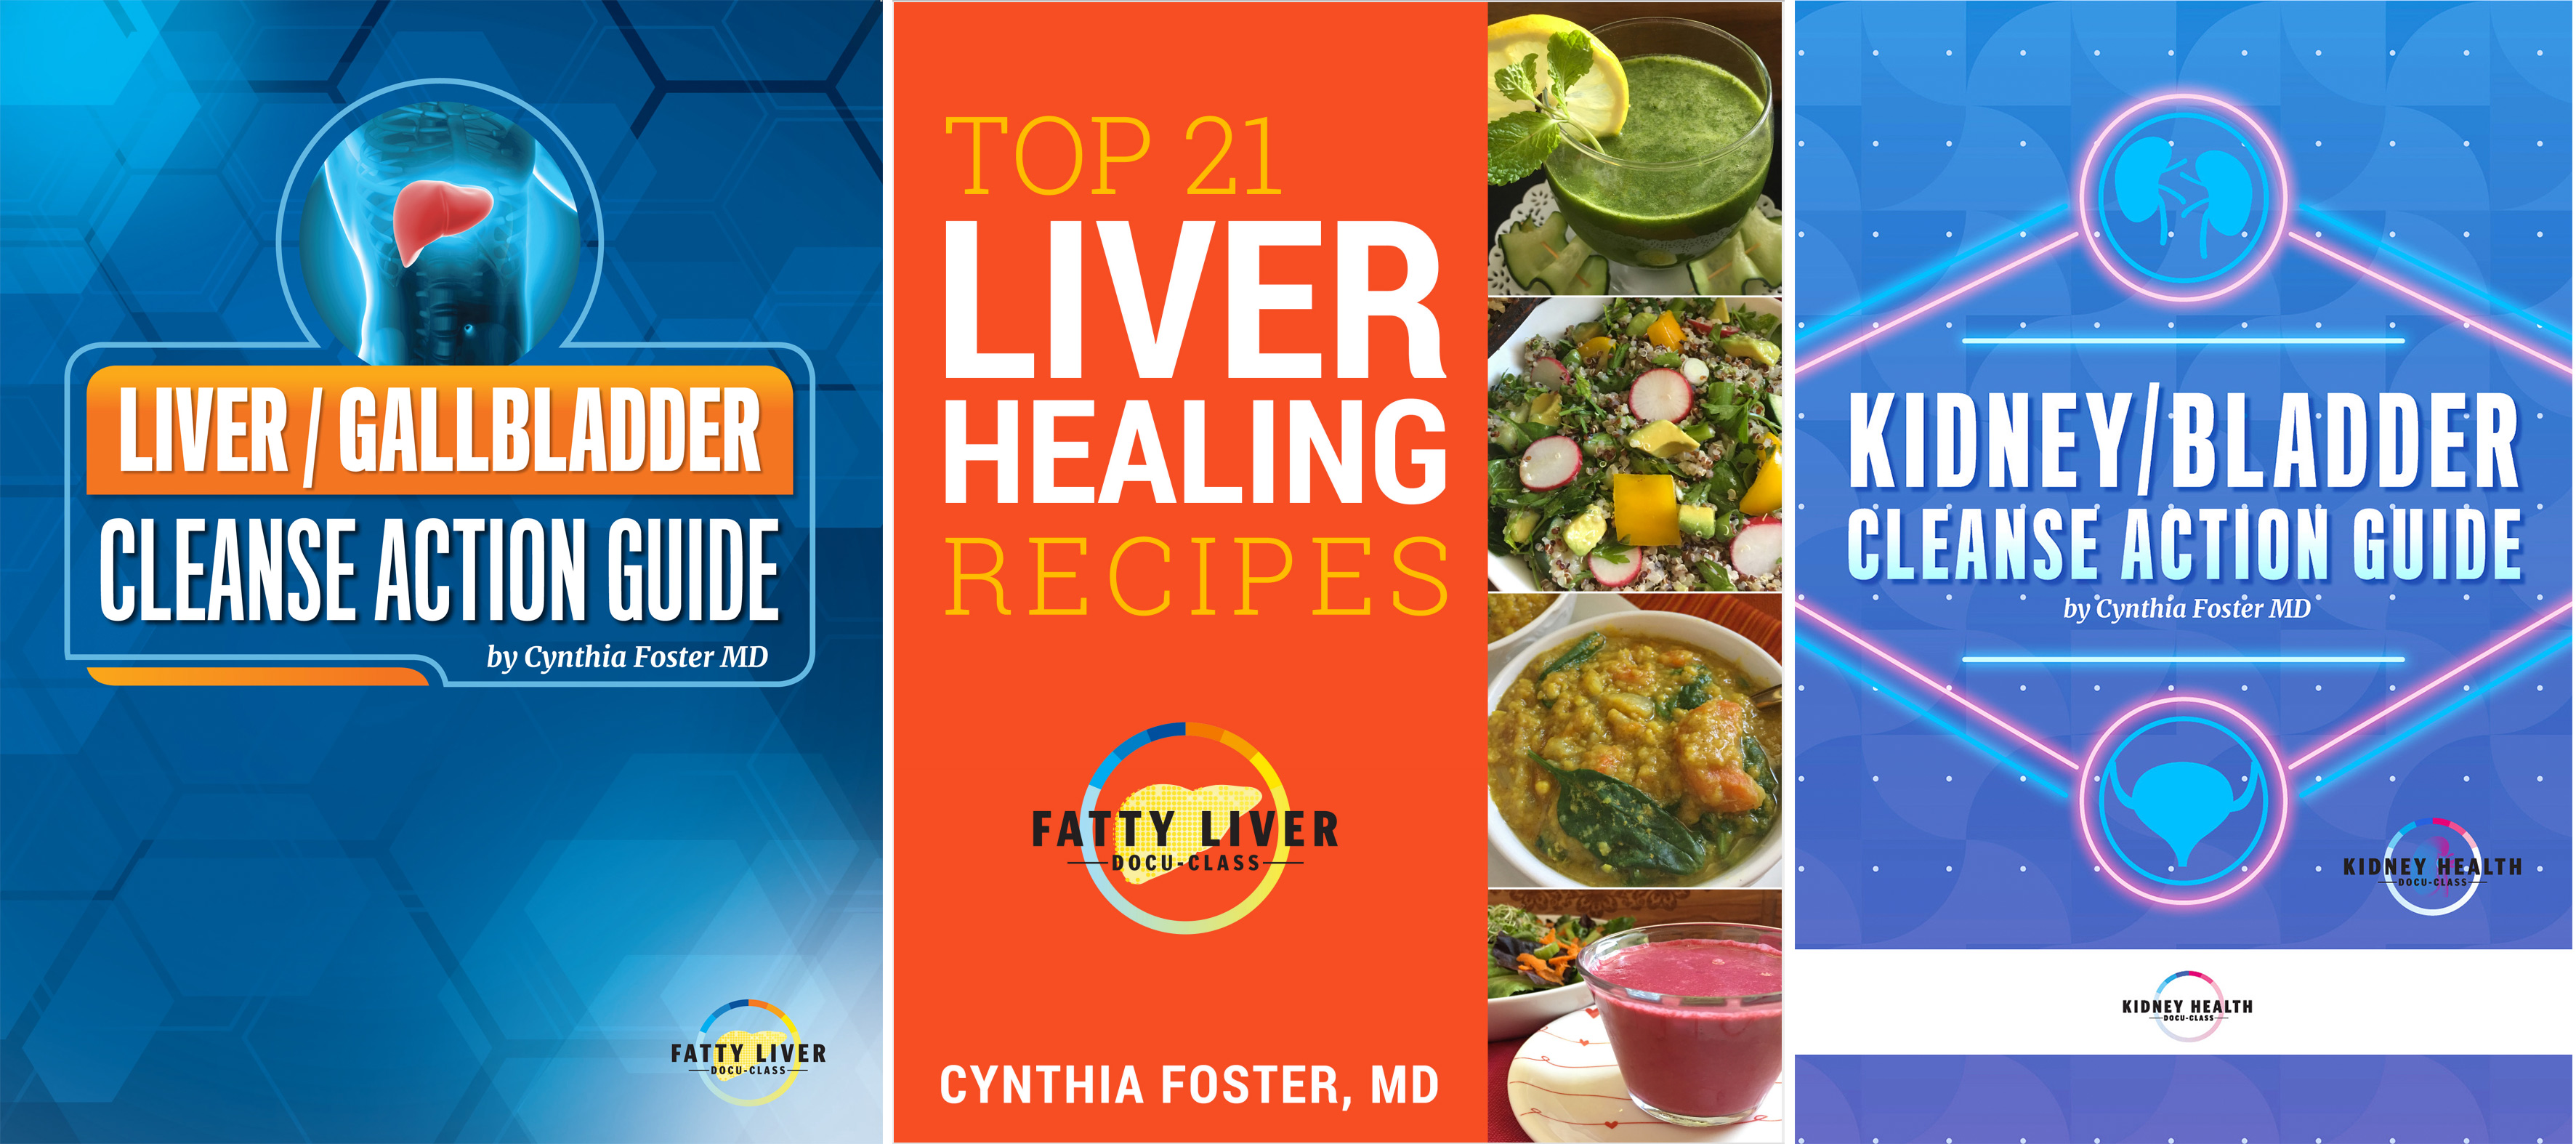 Cynthia Foster, MD - Liver Gallbladder Cleanse Action Guide, Top 21 Liver Healing Recipes, Kidney/Bladder Cleanse Action Guide - Fatty Liver Docu-Class